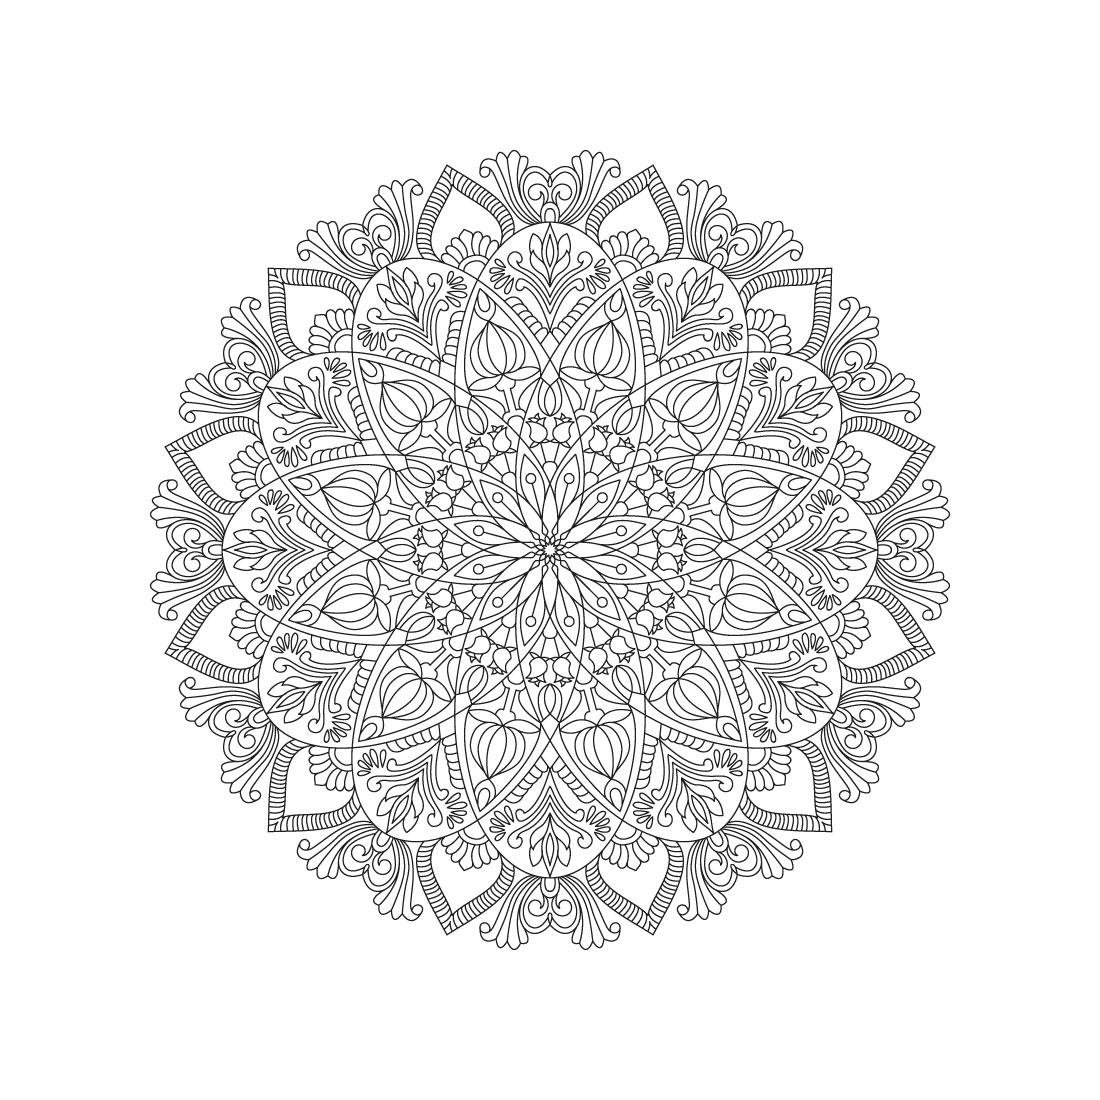 Bundle of 10 Blissful spheres Mandala Coloring Book Pages preview image.